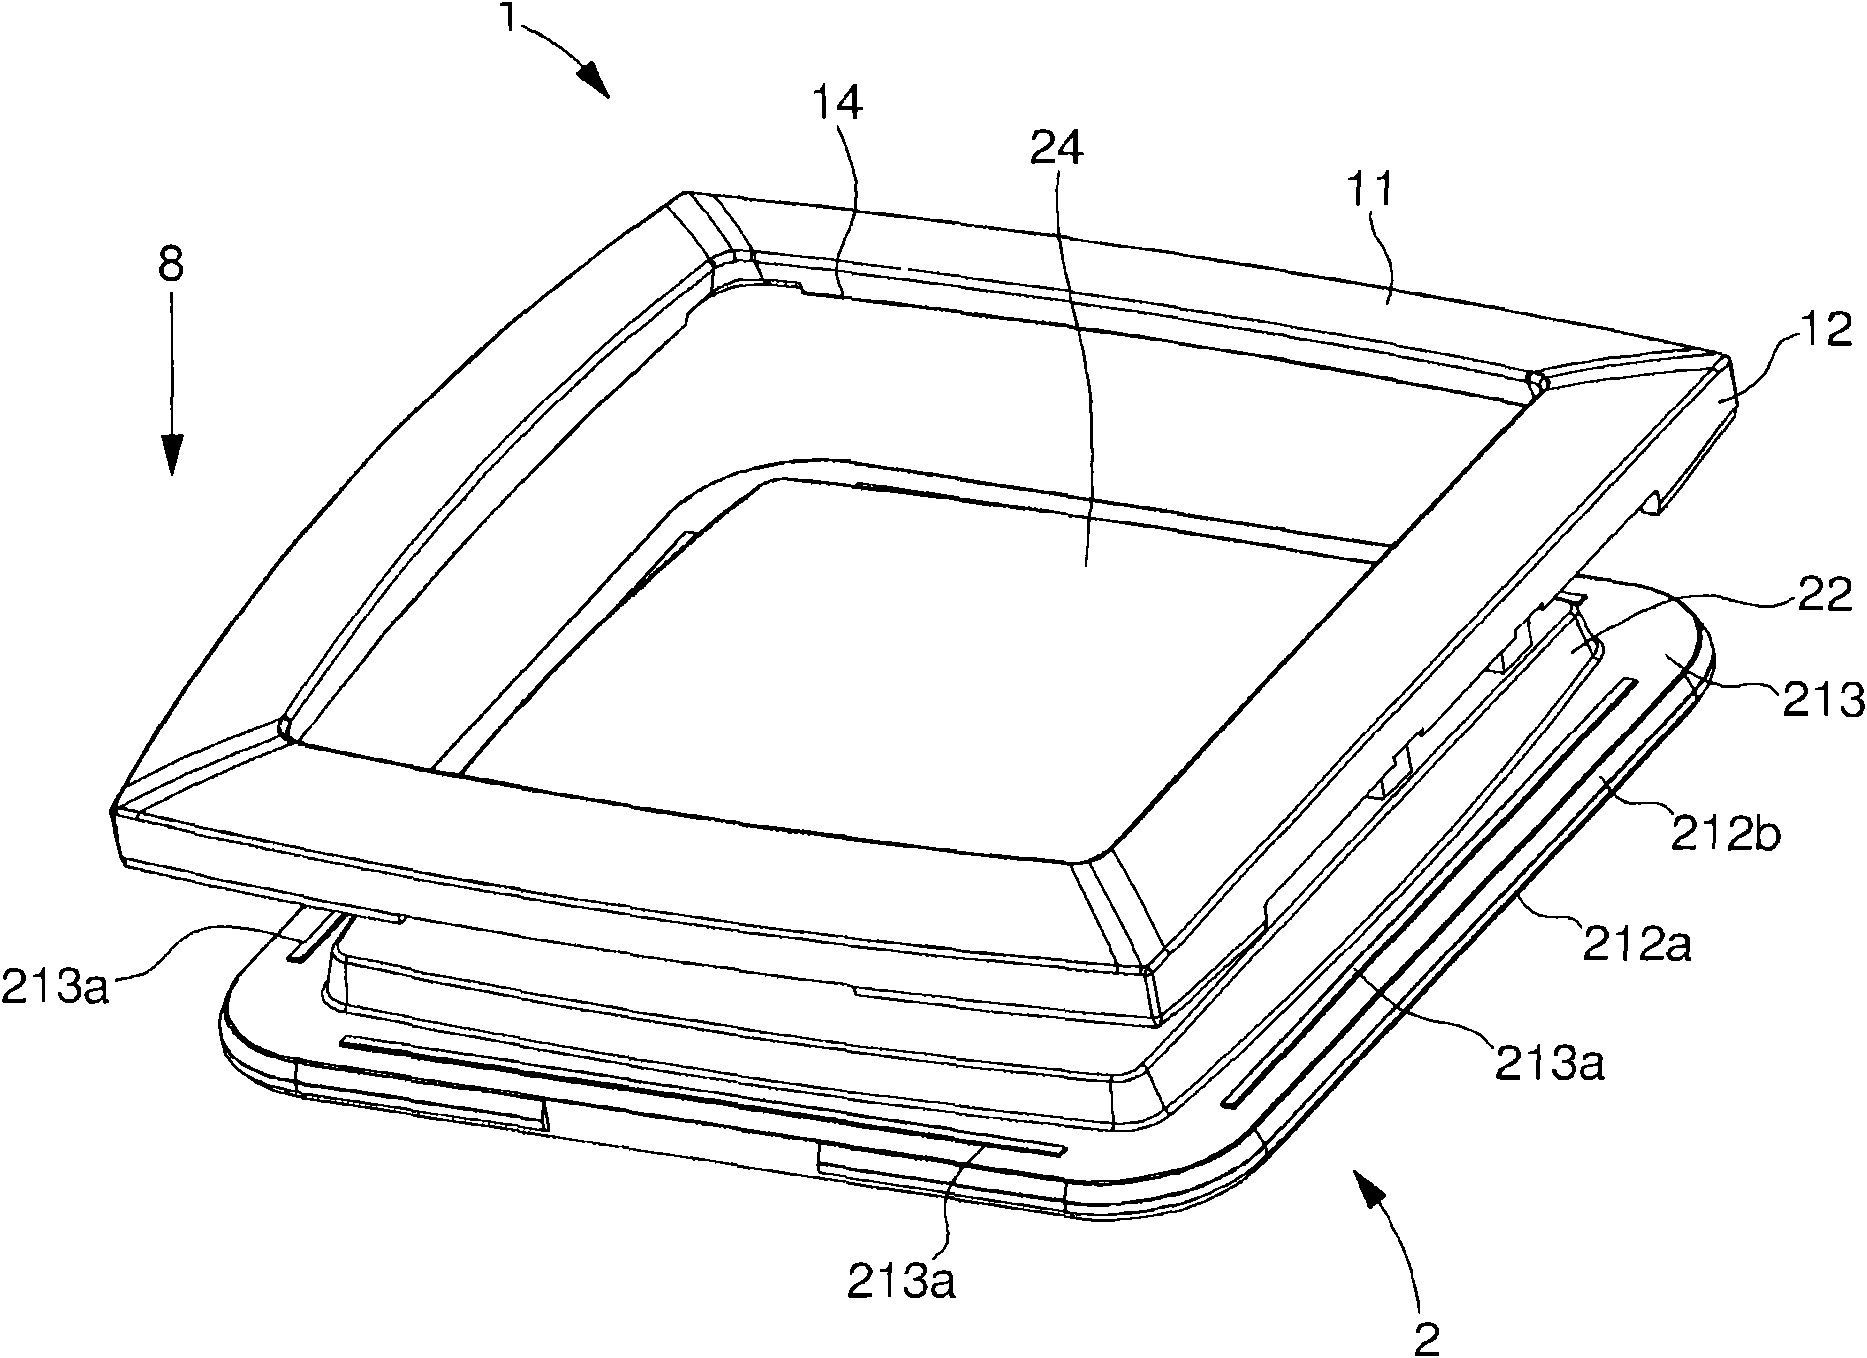 Method and device for fixing a sheet of glass with counter-blade